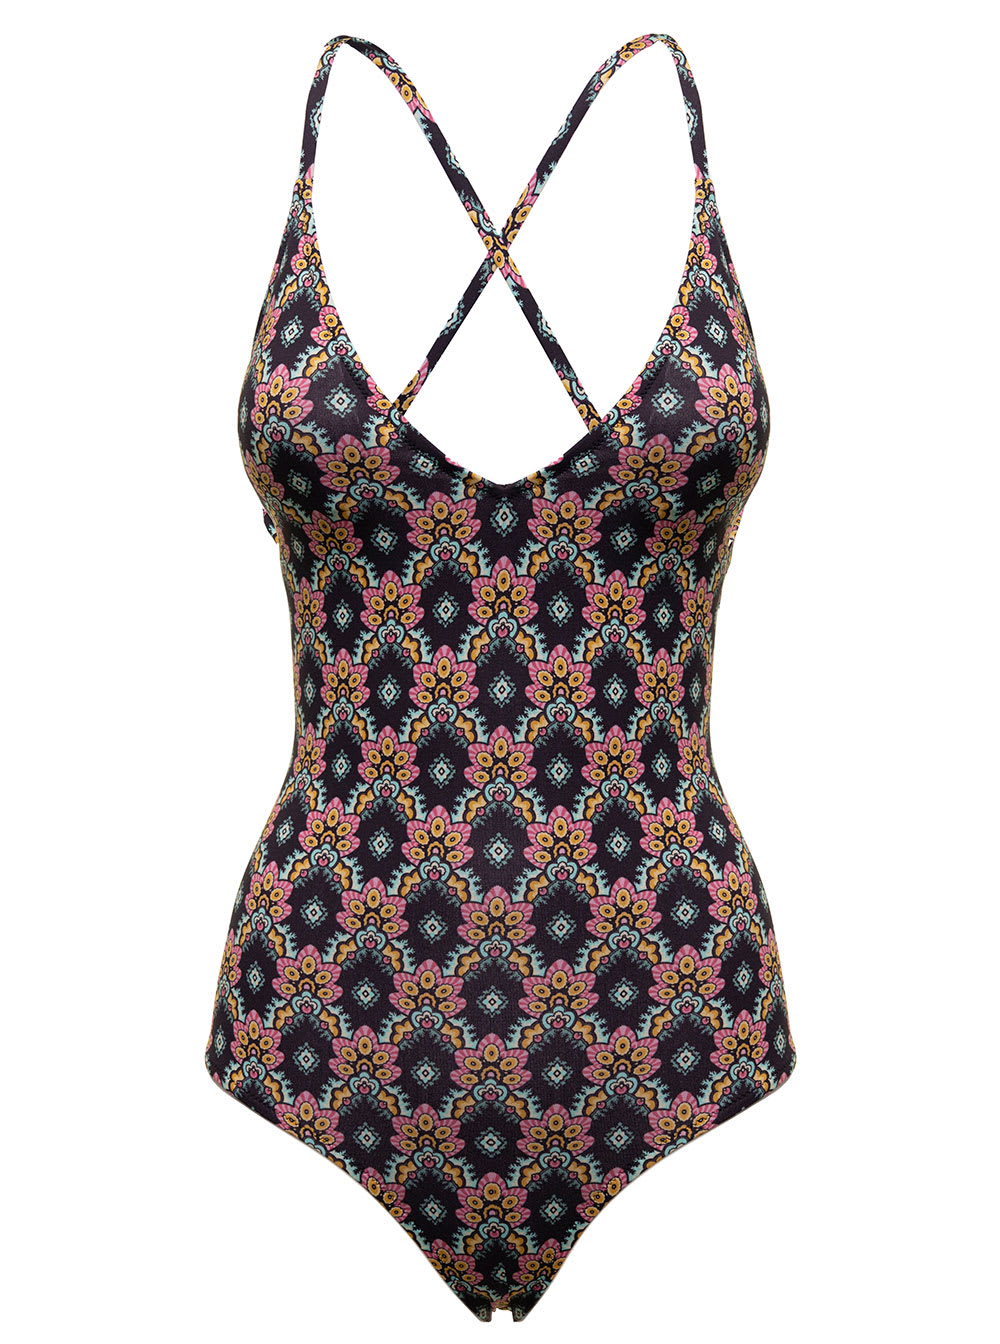 Anjuna Womans One-piece Ethnic Printed Stretch Fabric Swimsuit